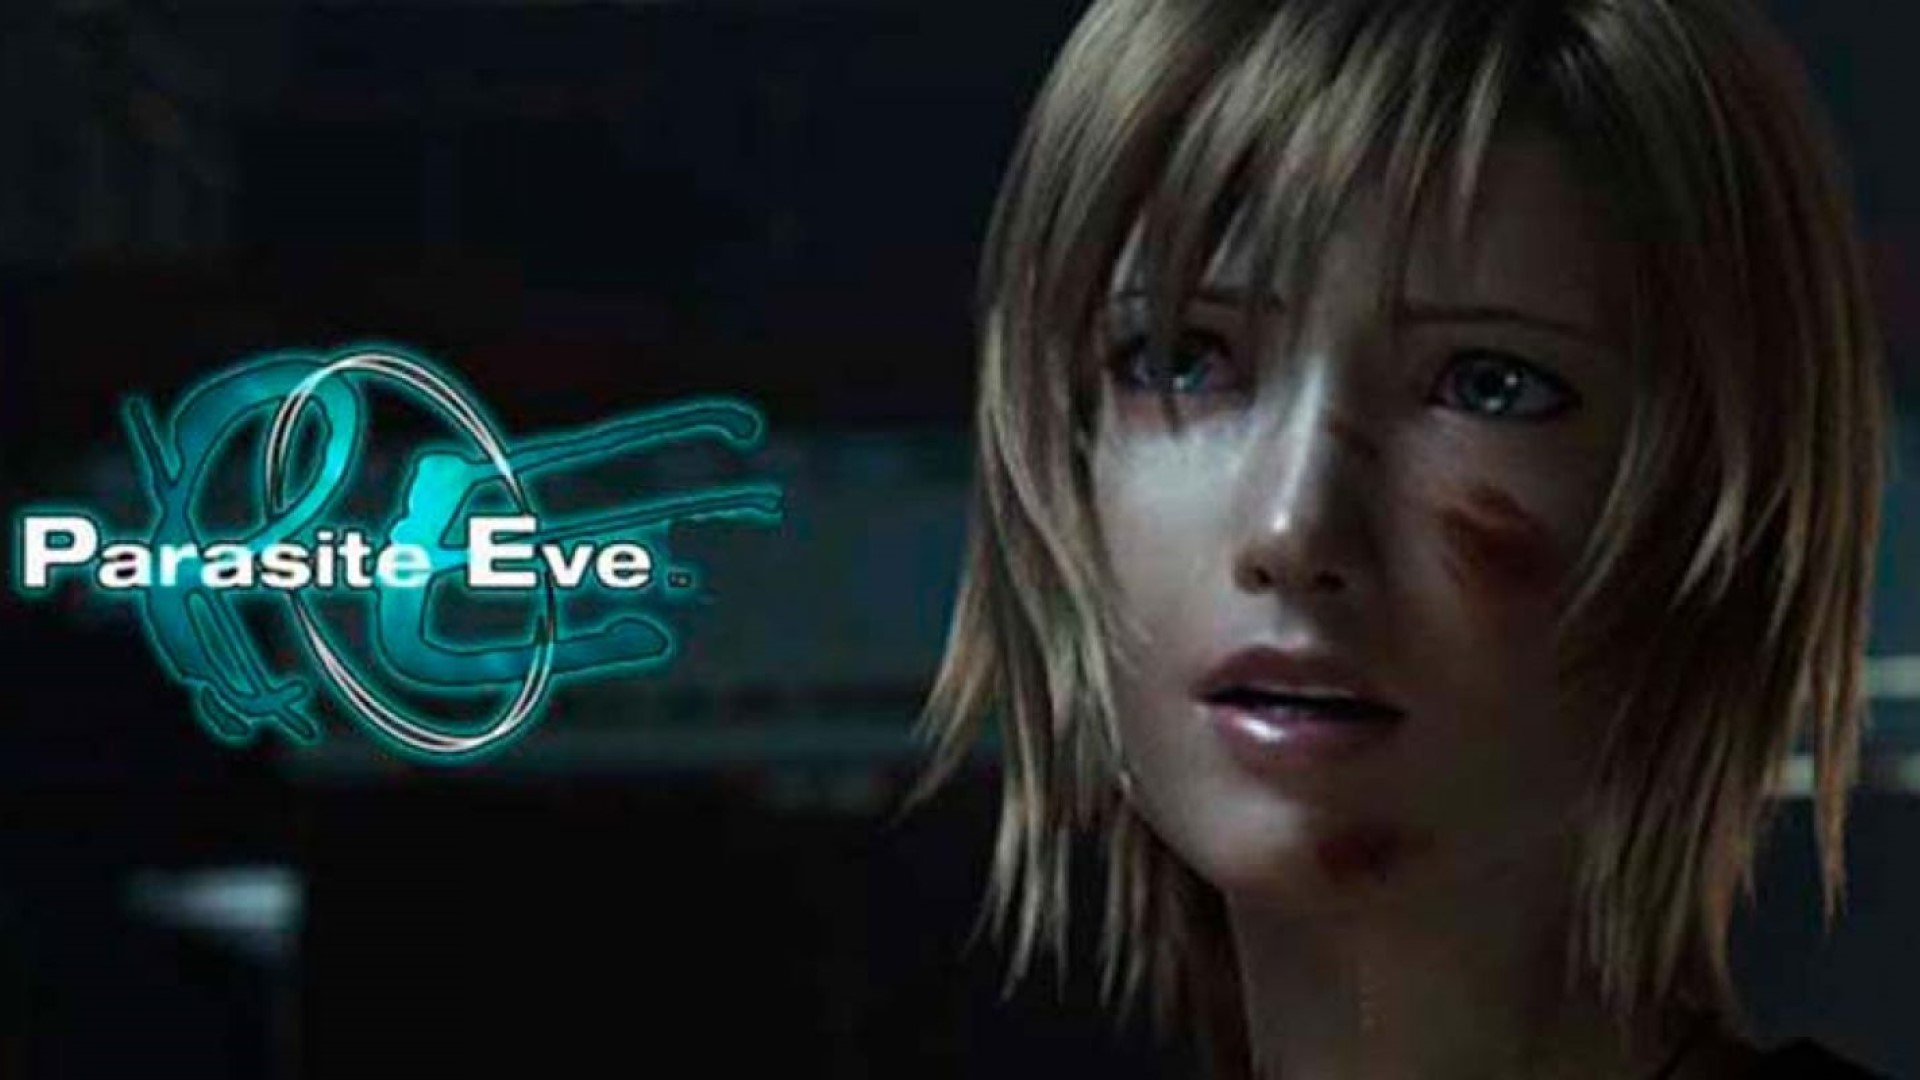 Square Enix Has Trademarked “Symbiogenesis”, Which Could be a Eve Revival